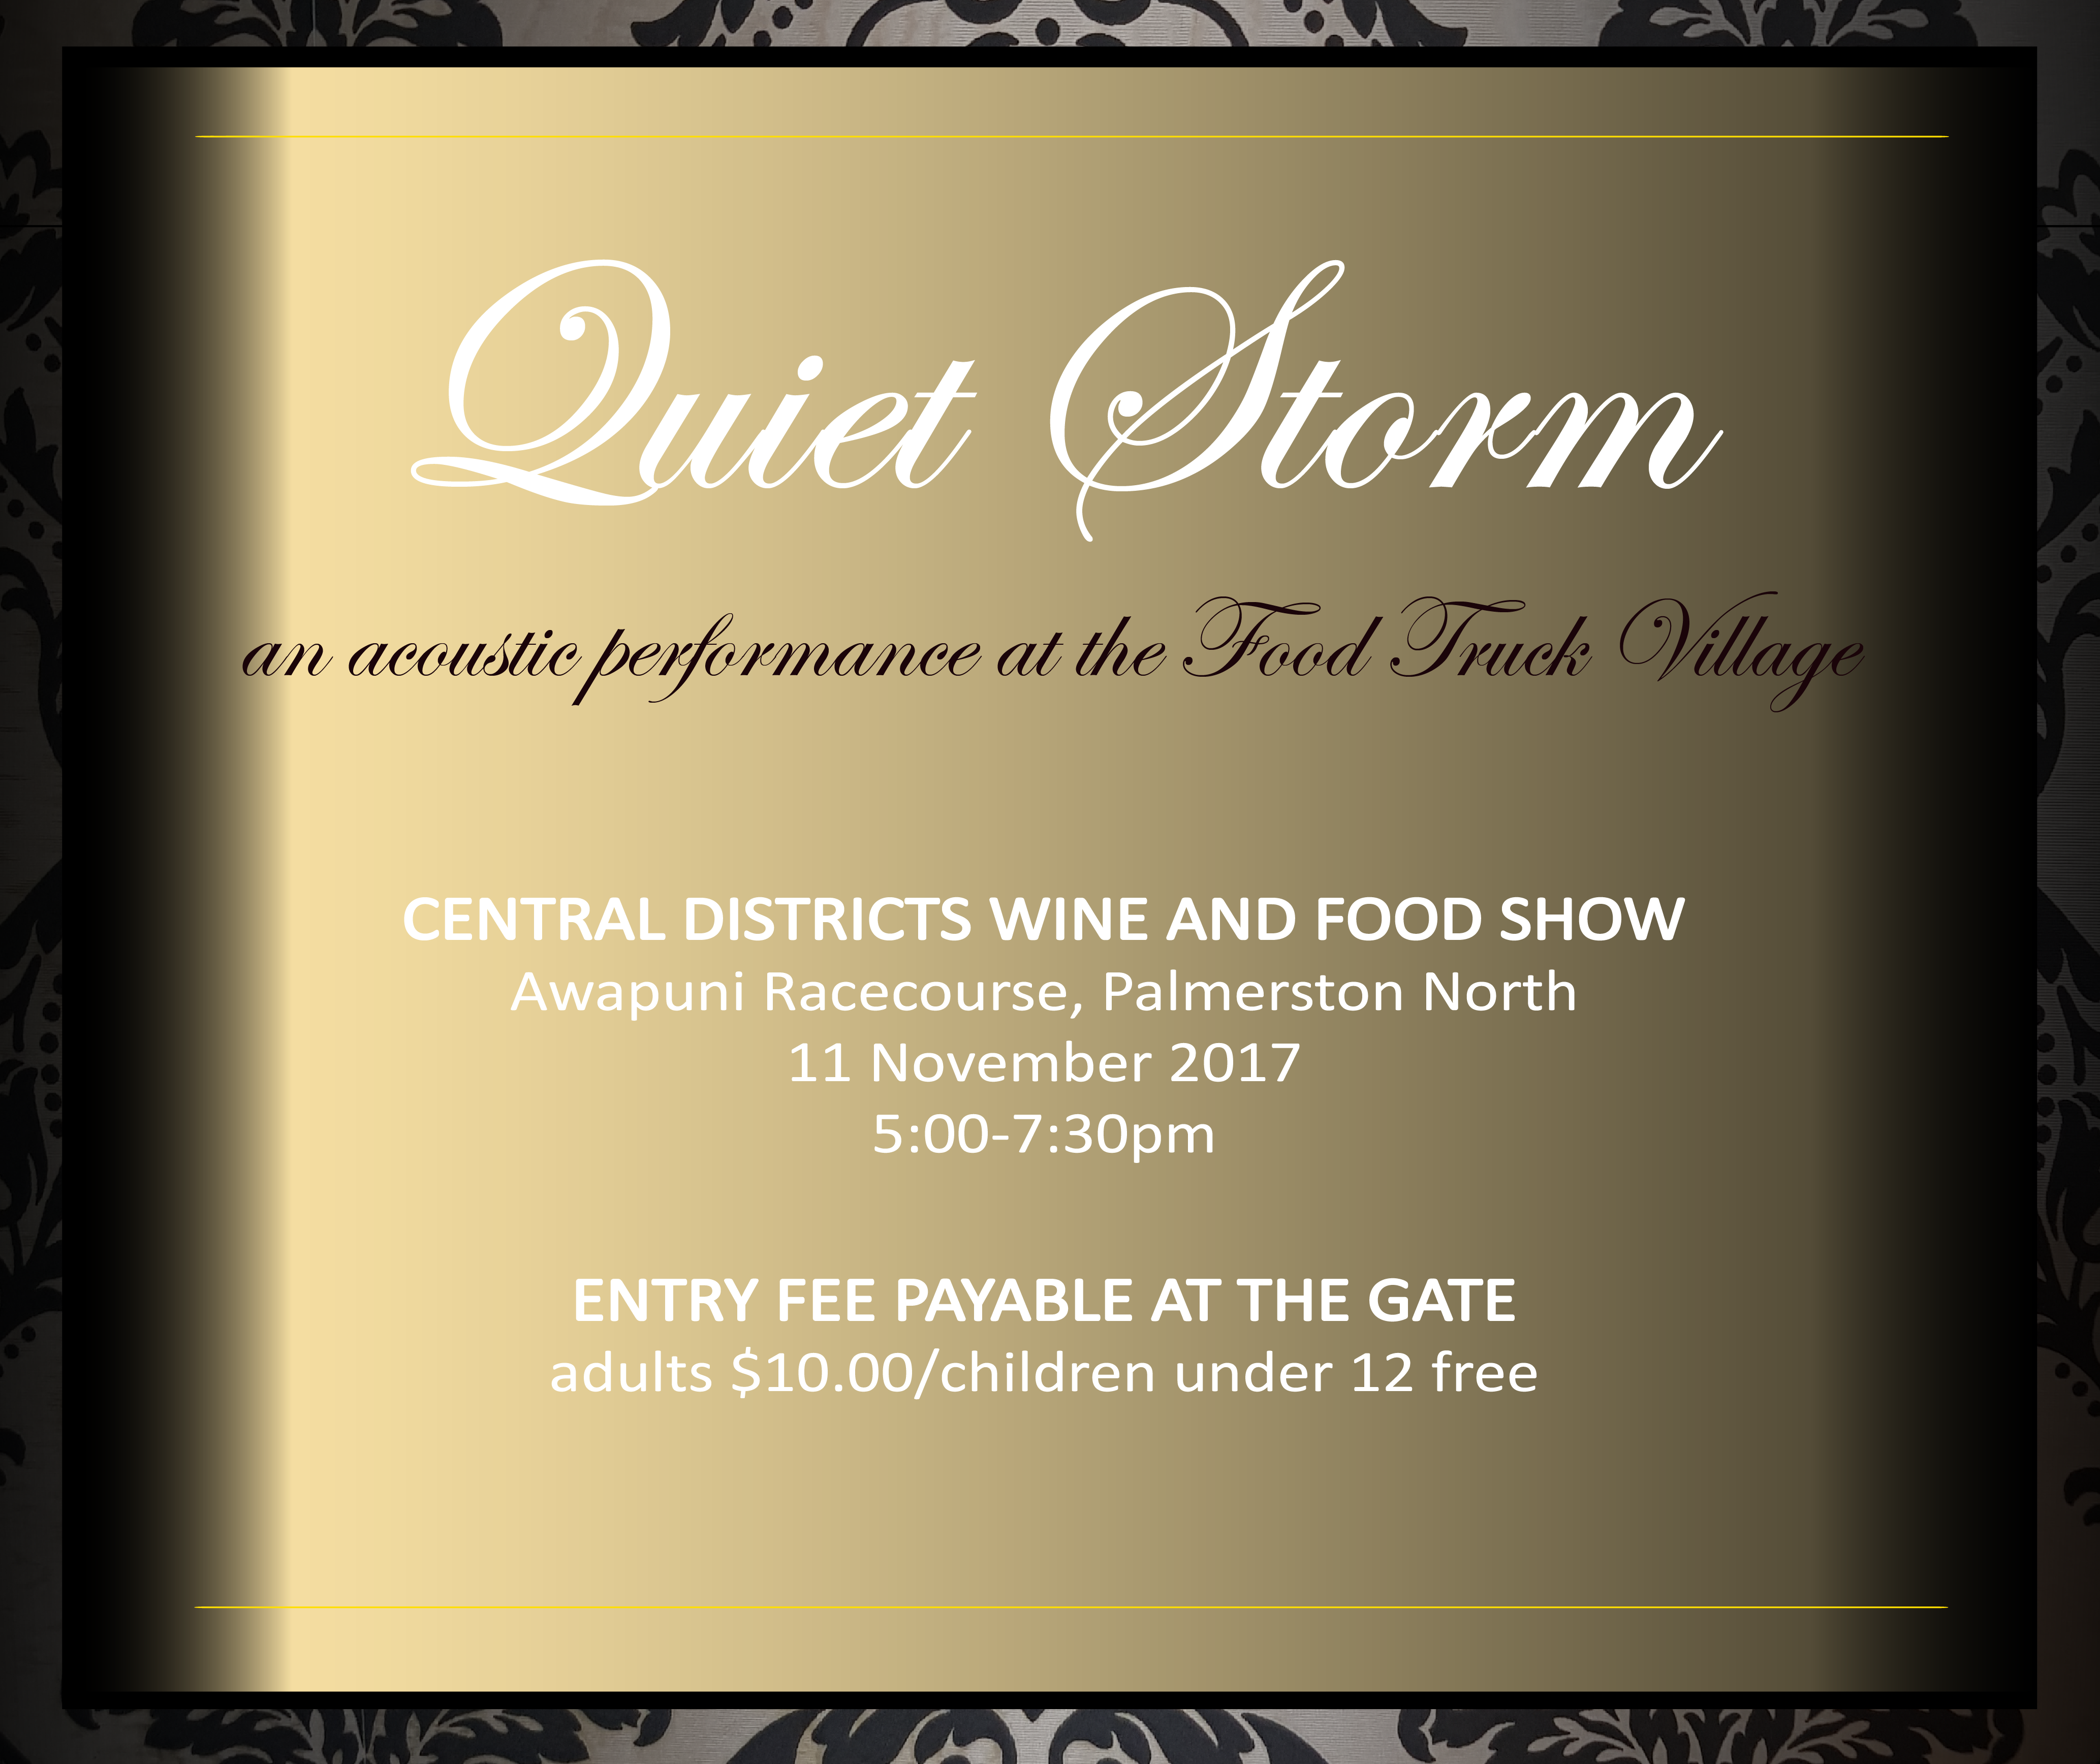 Central Districts Food & Wine Show 2017: Saturday, 11 November